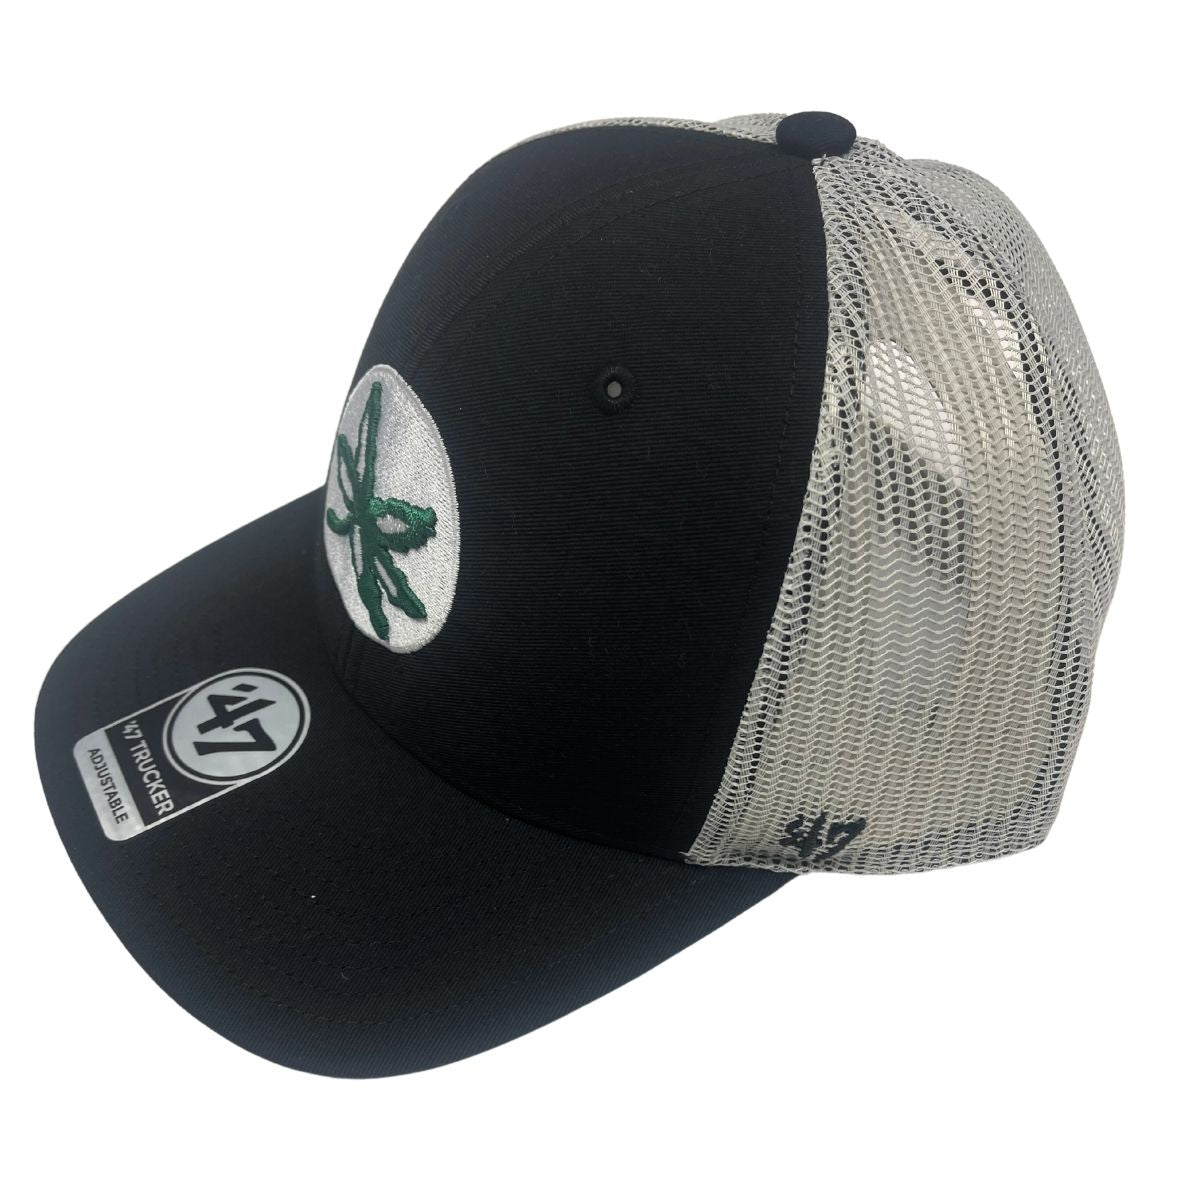 side view of black trucker with gray mesh with buckeye logo on front